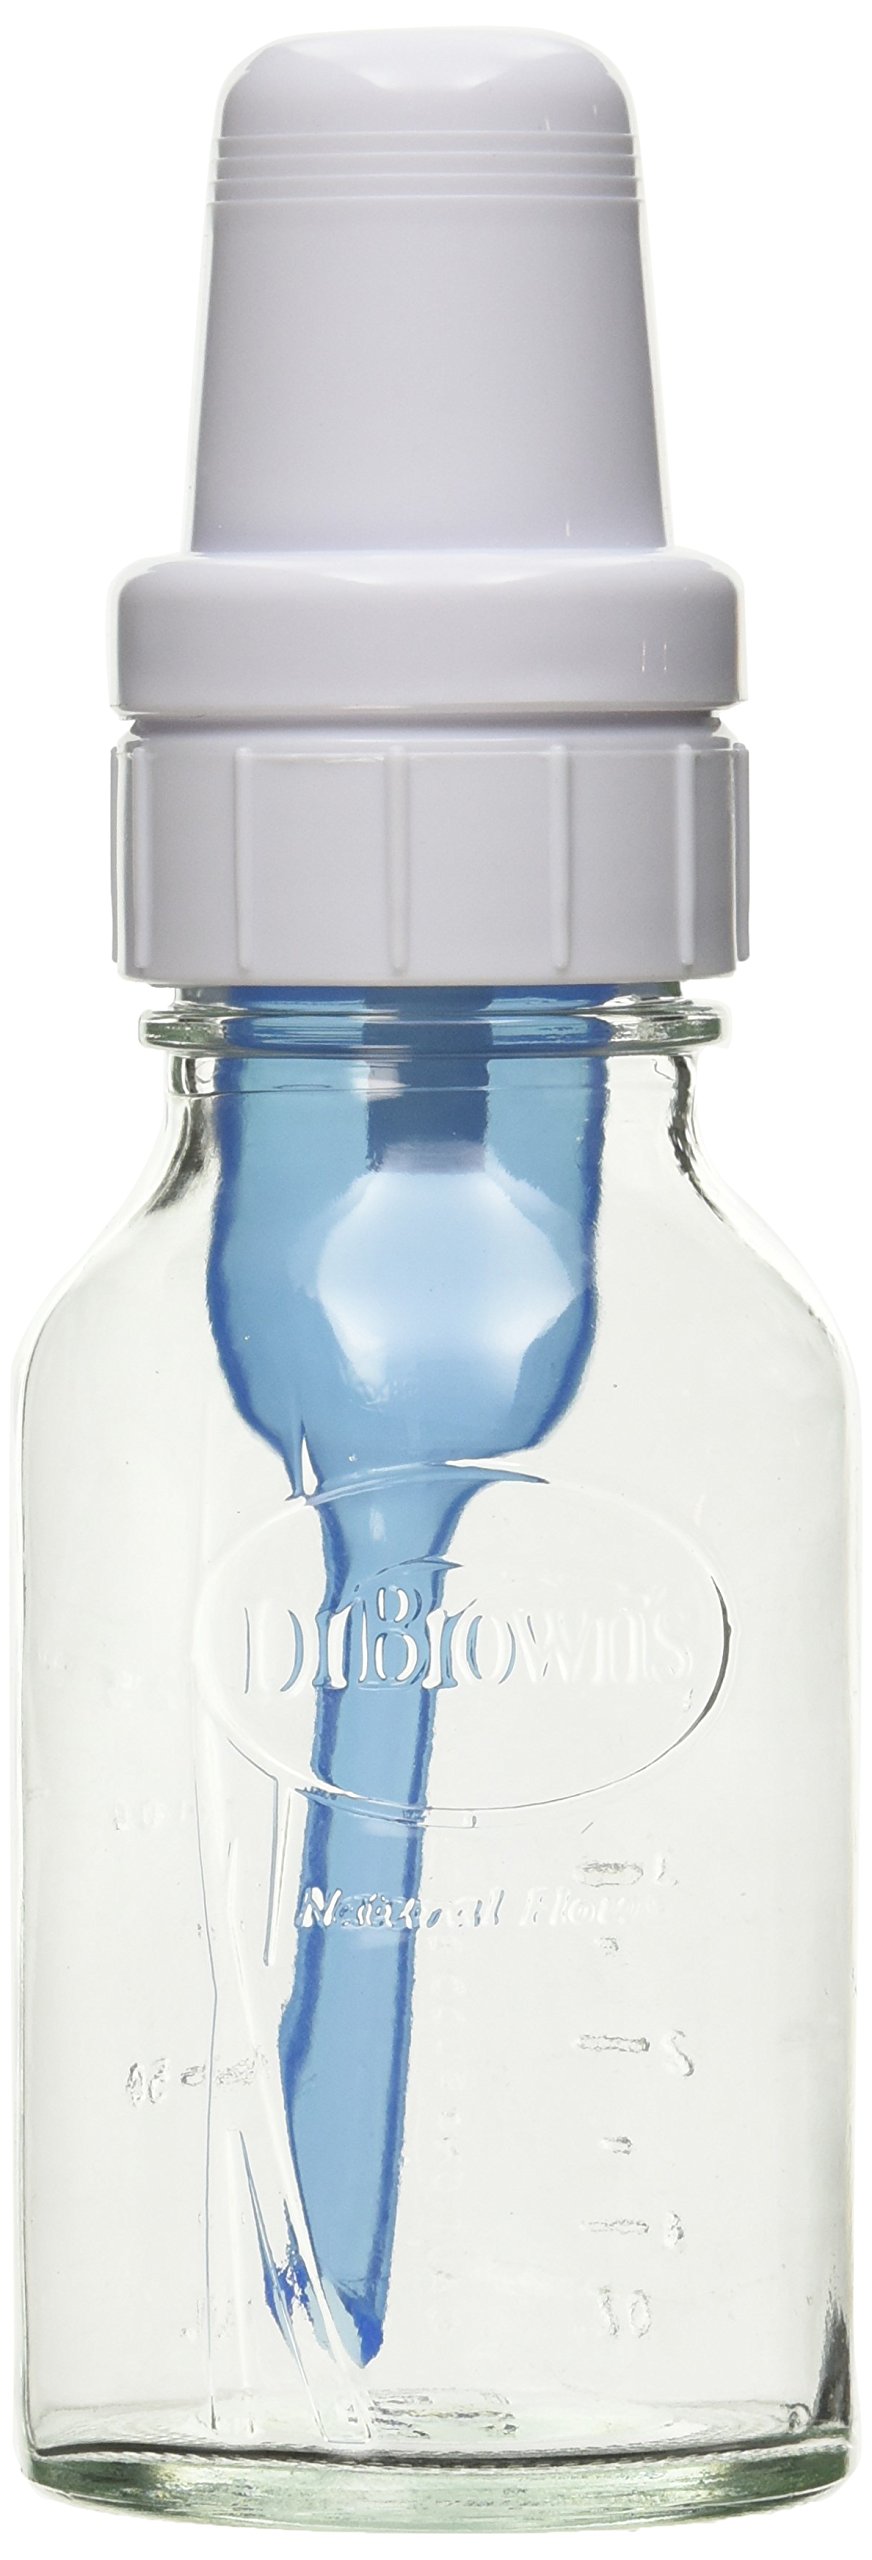 Dr. Brown's - Natural Flow Glass Baby Bottle 2 Pack - 4 oz. - image 1 of 4